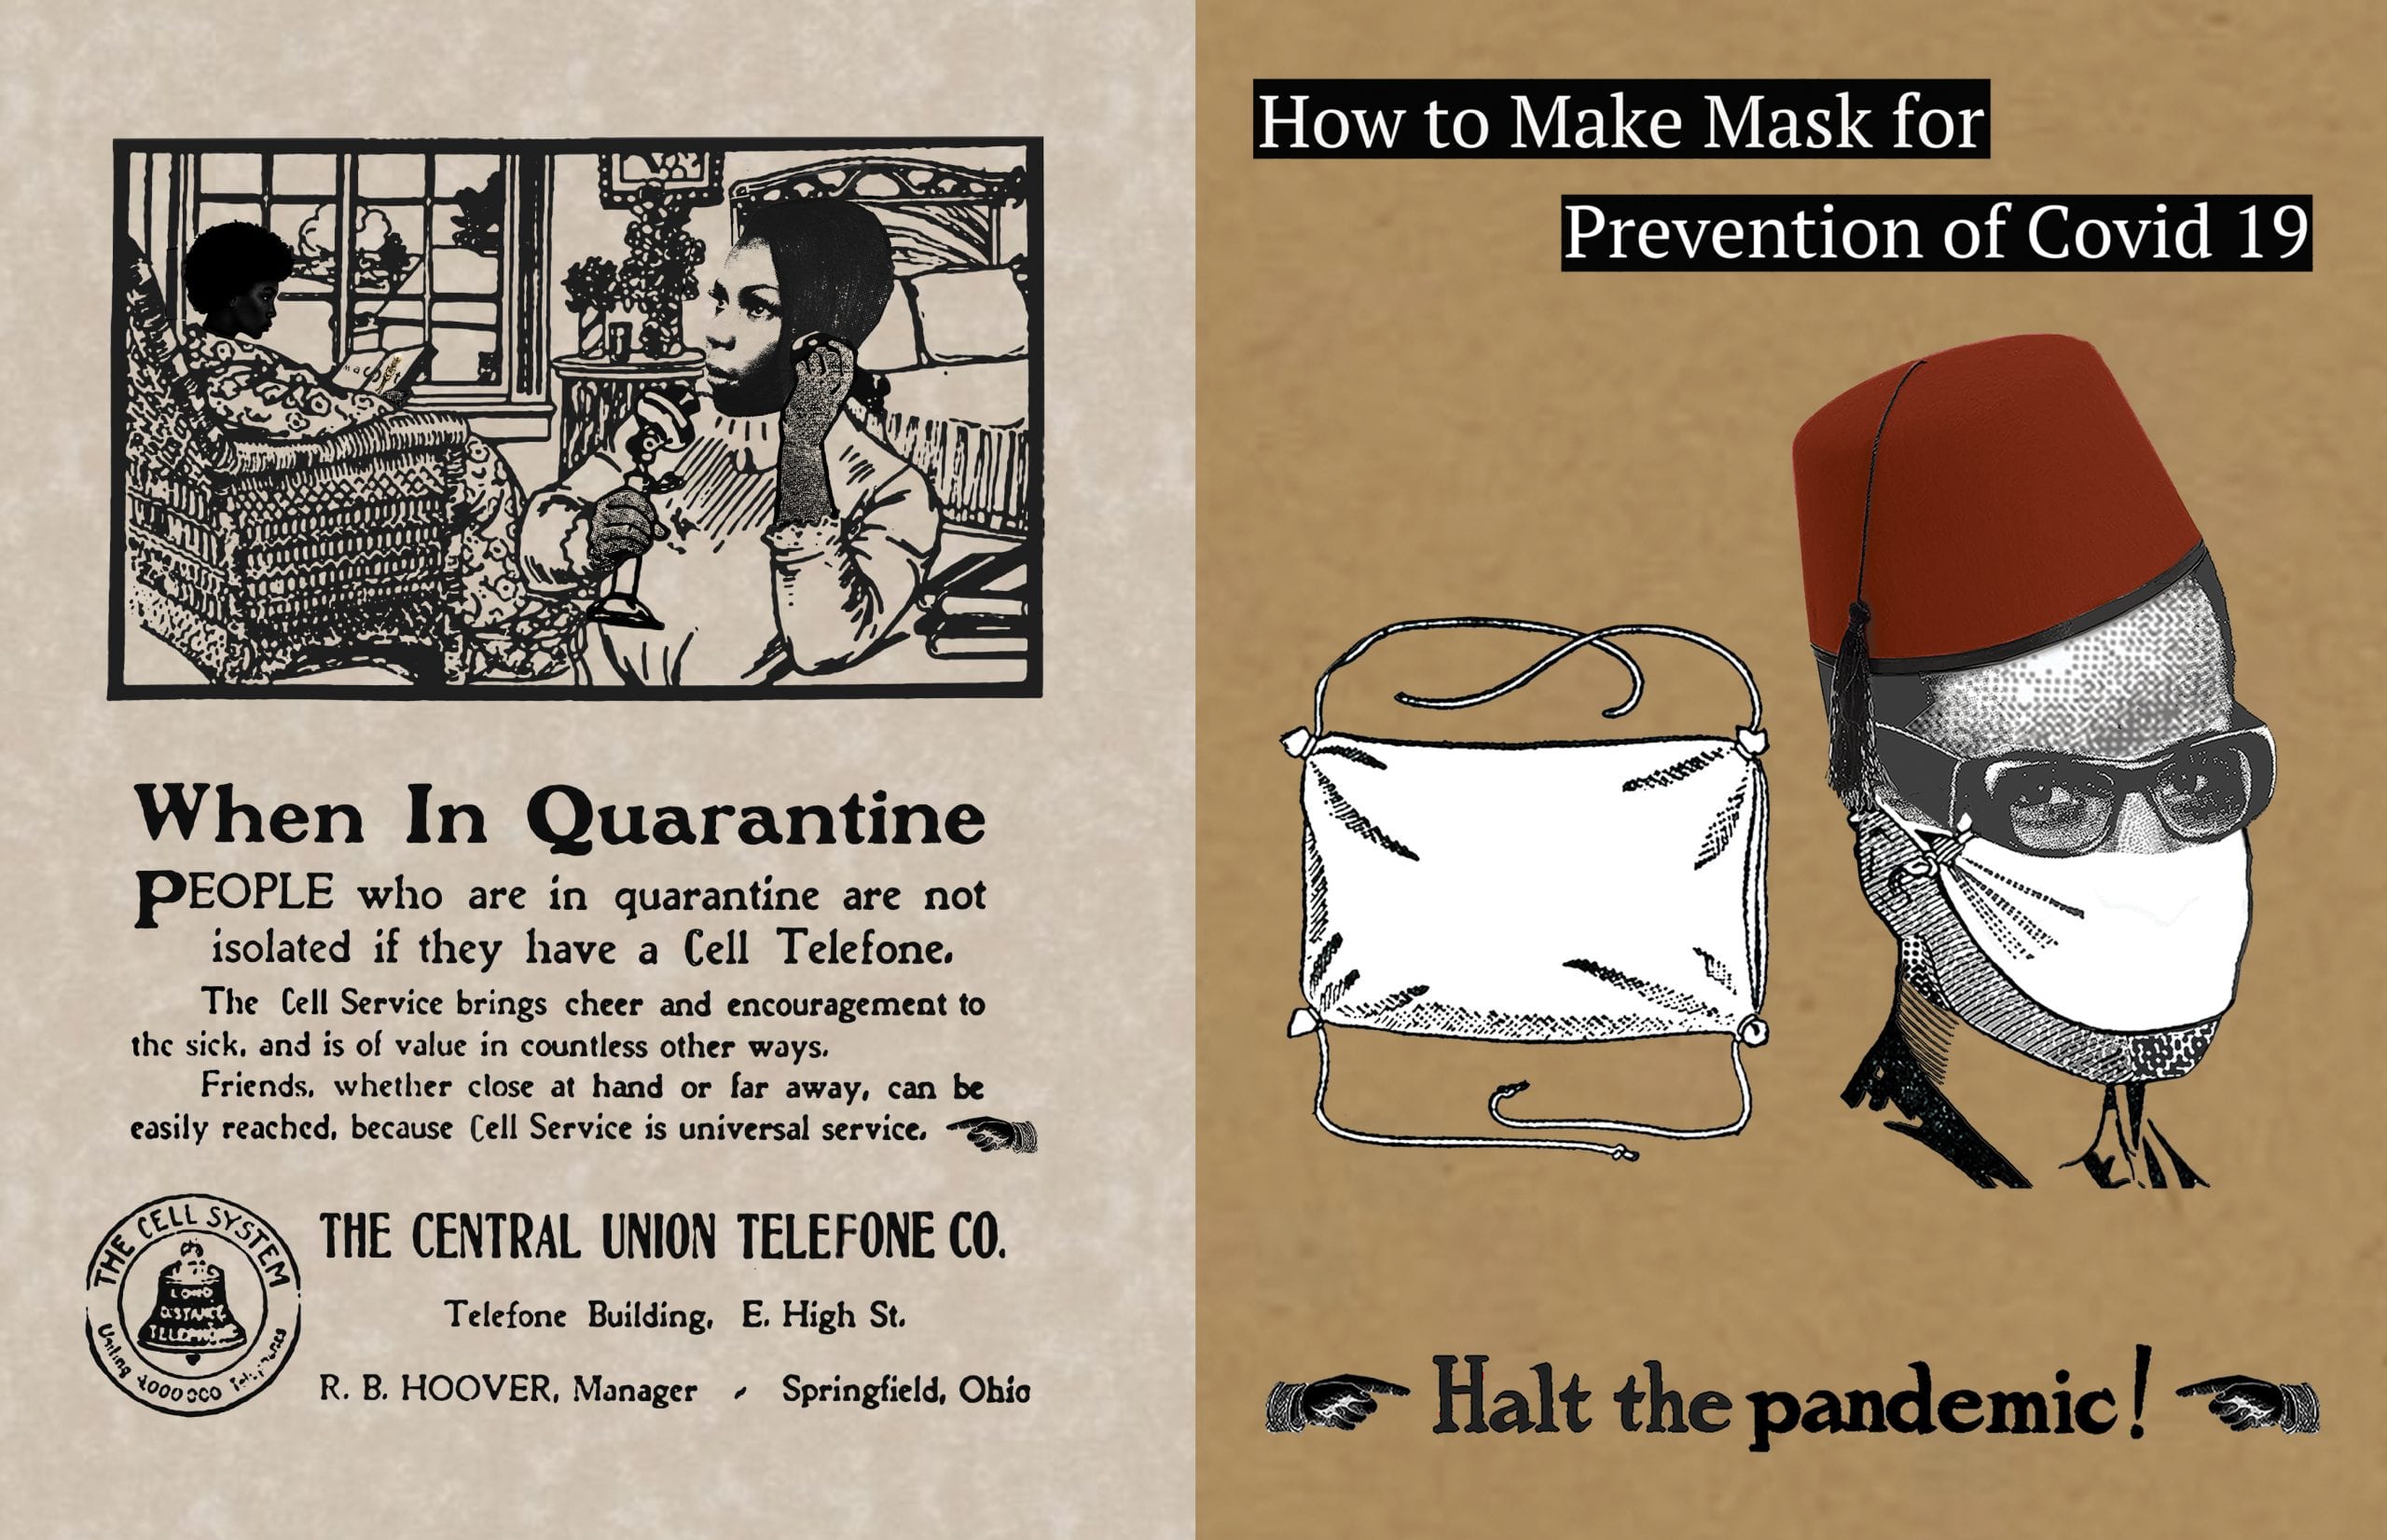 Collaged artwork that visually connects the current pandemic to the 1918 flu pandemic: on left, an old-fashioned ad for telephones, remixed to advertise the usefulness of cell phones during the novel coronavirus pandemic; the right similarly similarly shows a vintage ad with a man in fez hat and face mask, reading "Halt the Pandemic!"